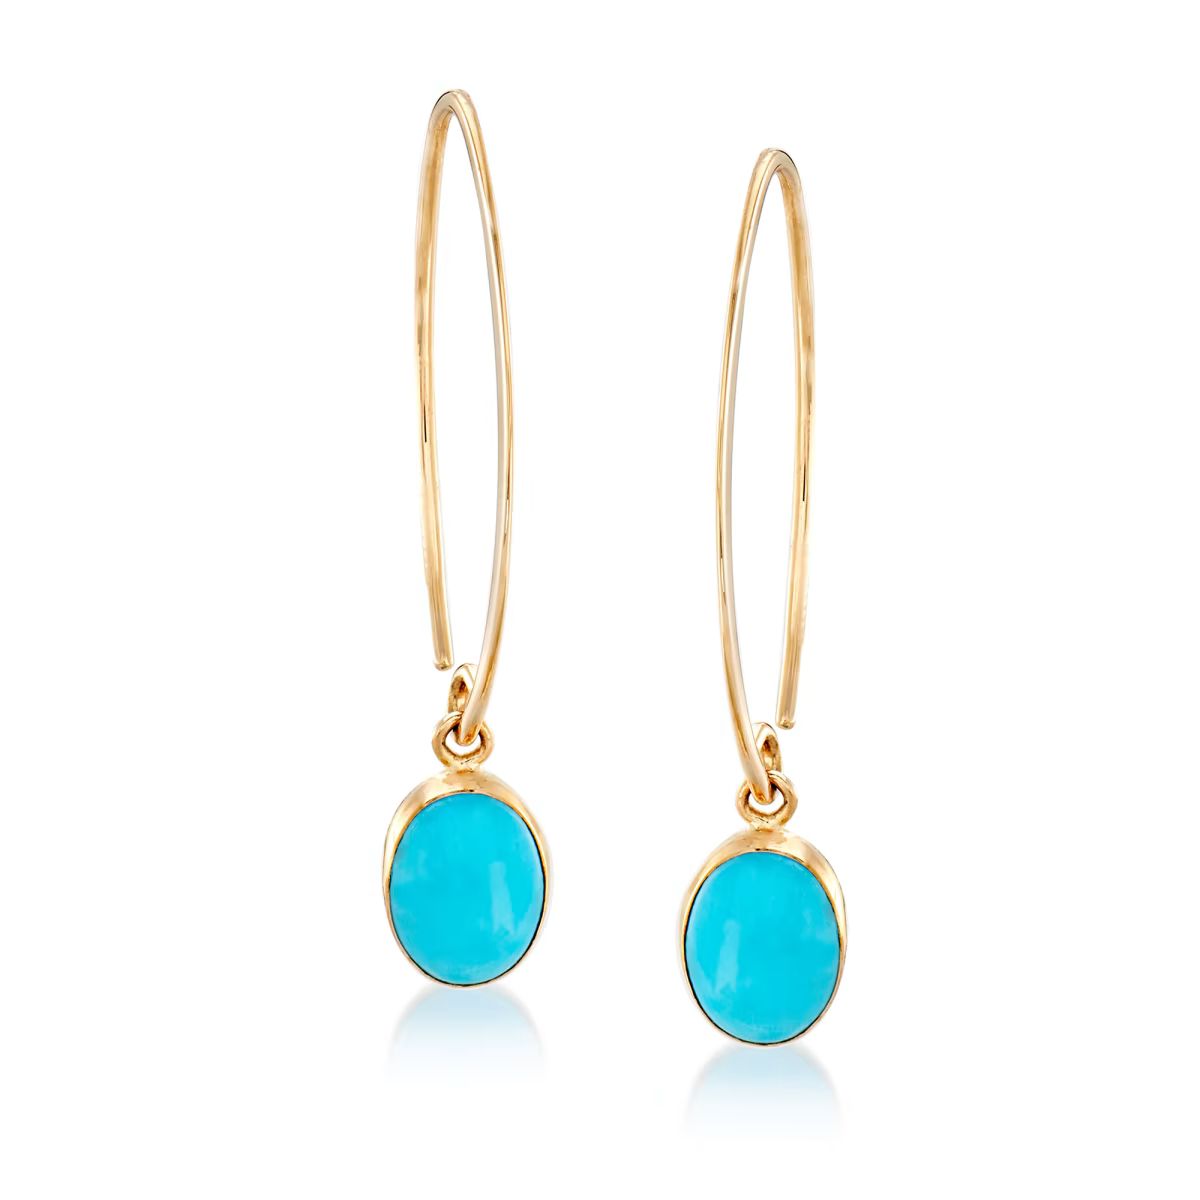 Turquoise Drop Earrings in 14kt Yellow Gold | Ross-Simons